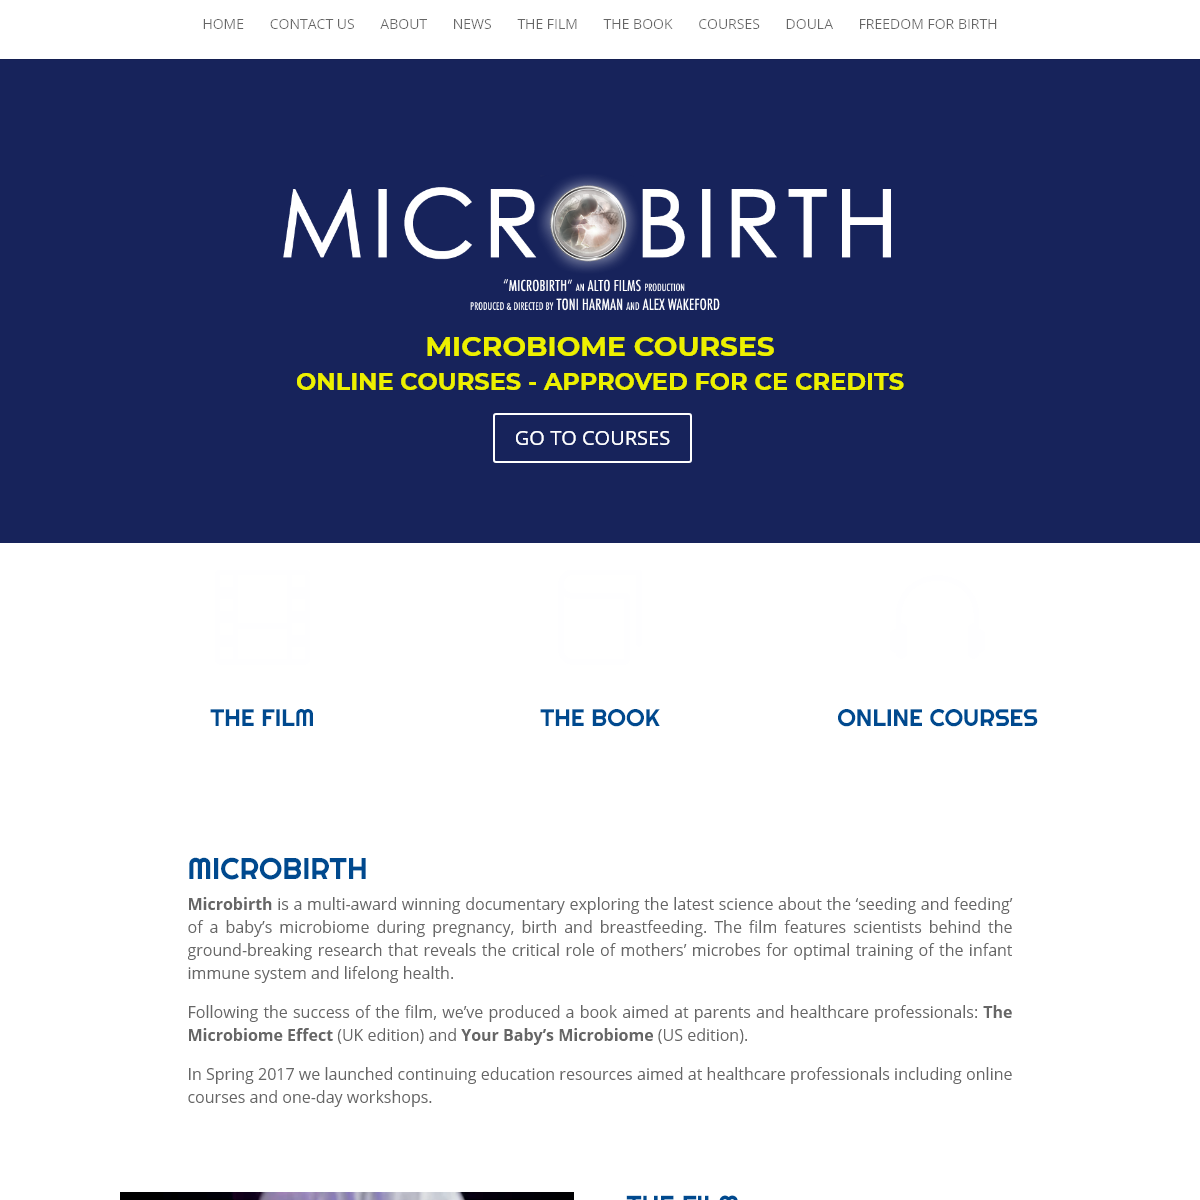 A complete backup of microbirth.com